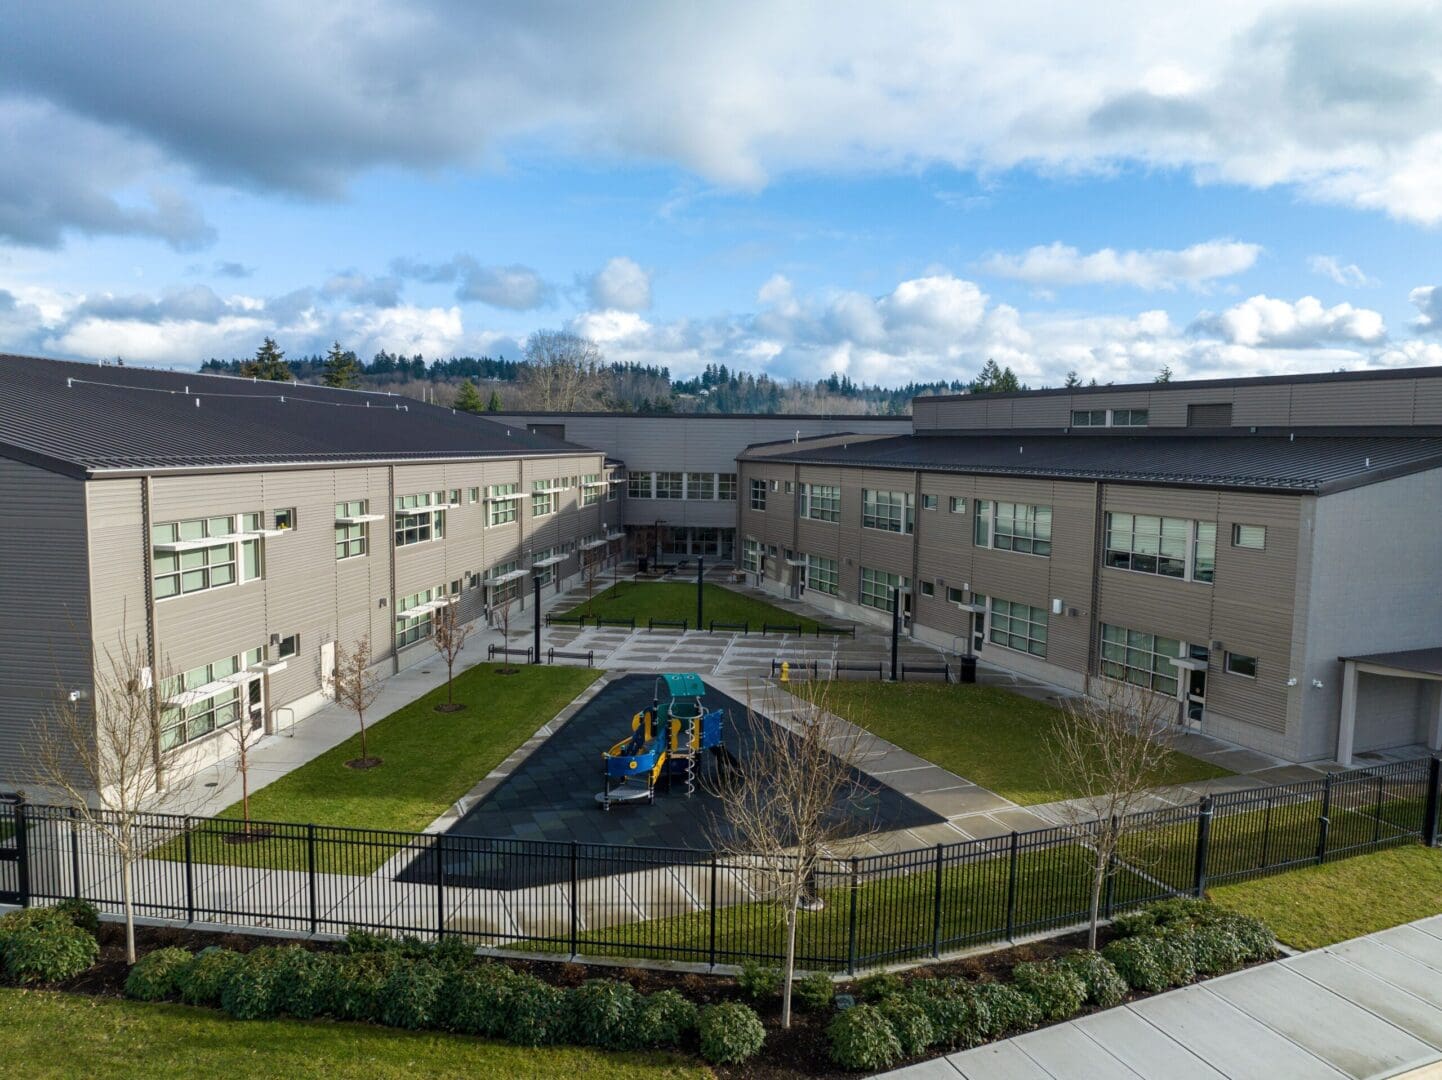 An aerial view of a school building with a playground.